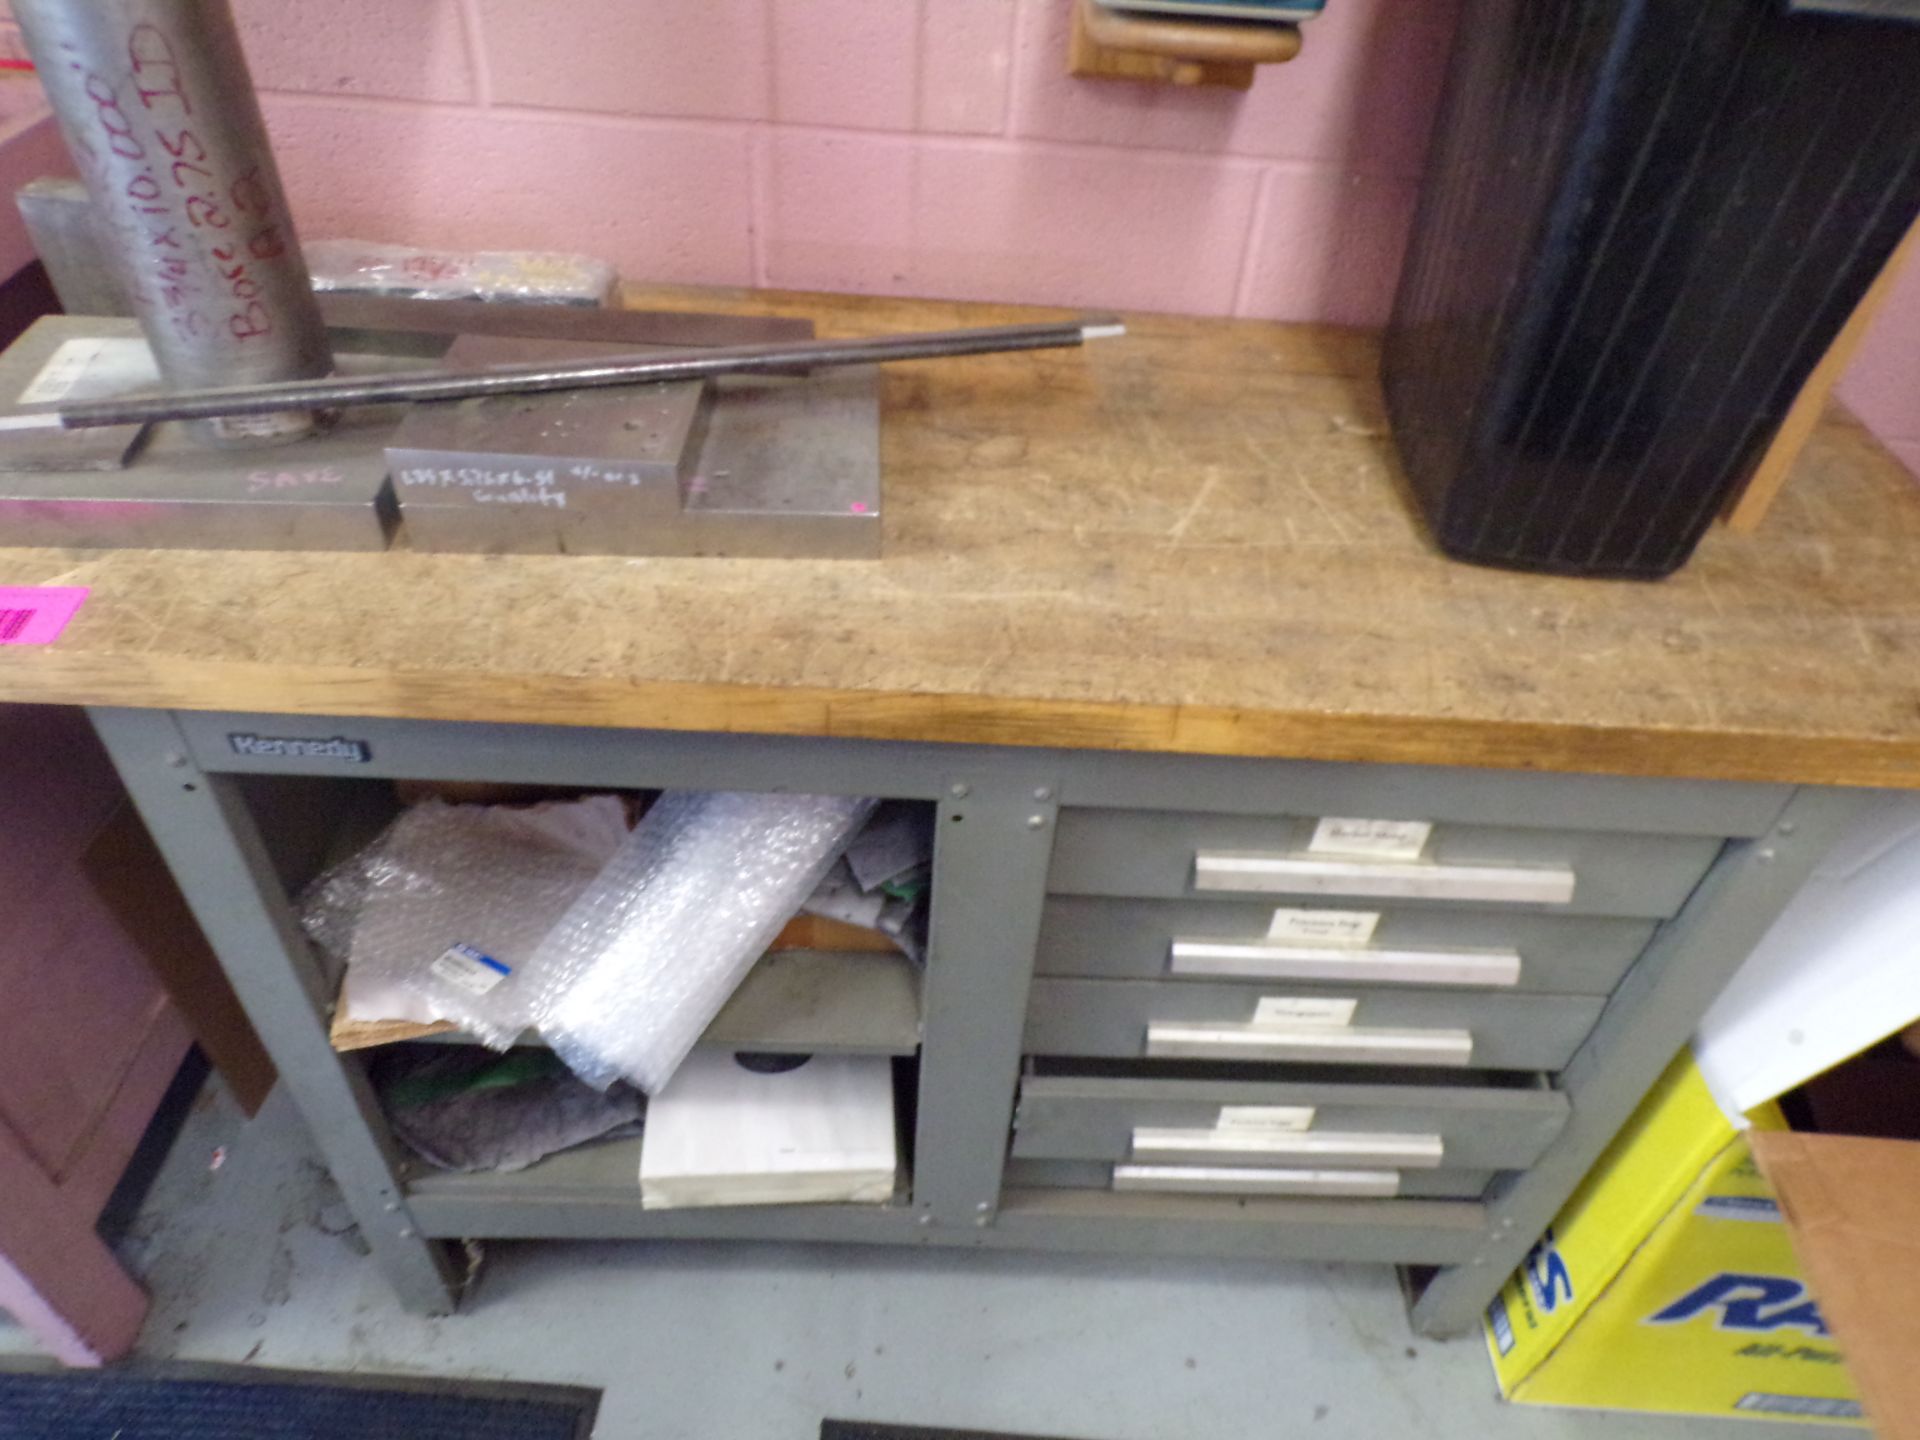 Kennedy work bench w/TOOL Steel, CRS pieces - Image 8 of 10